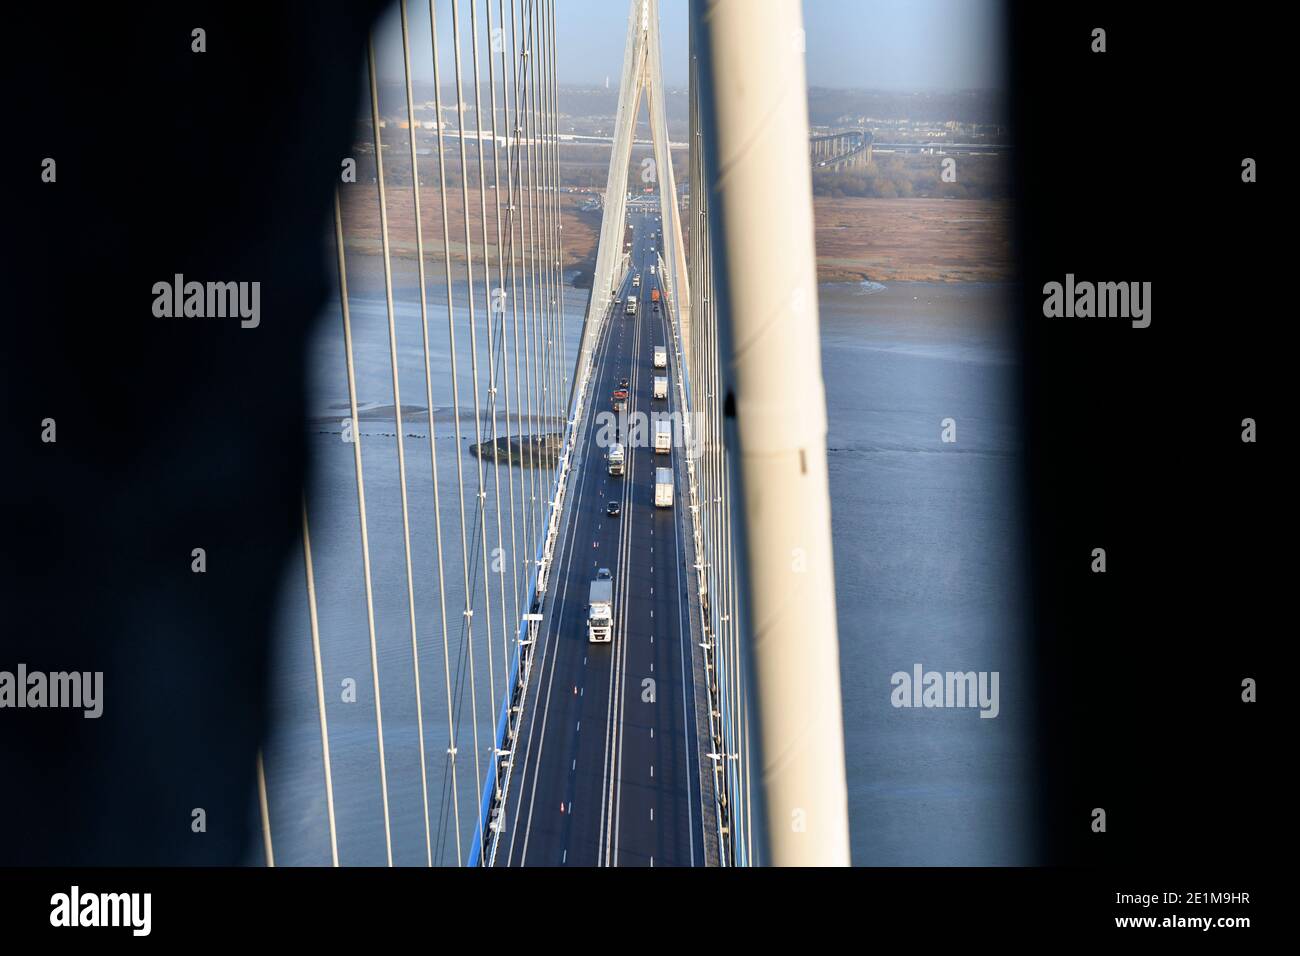 The Normandy Bridge on the estuary of the River Seine (Normandy, northern France): view from the top of a pylon over the guy wires that support the br Stock Photo